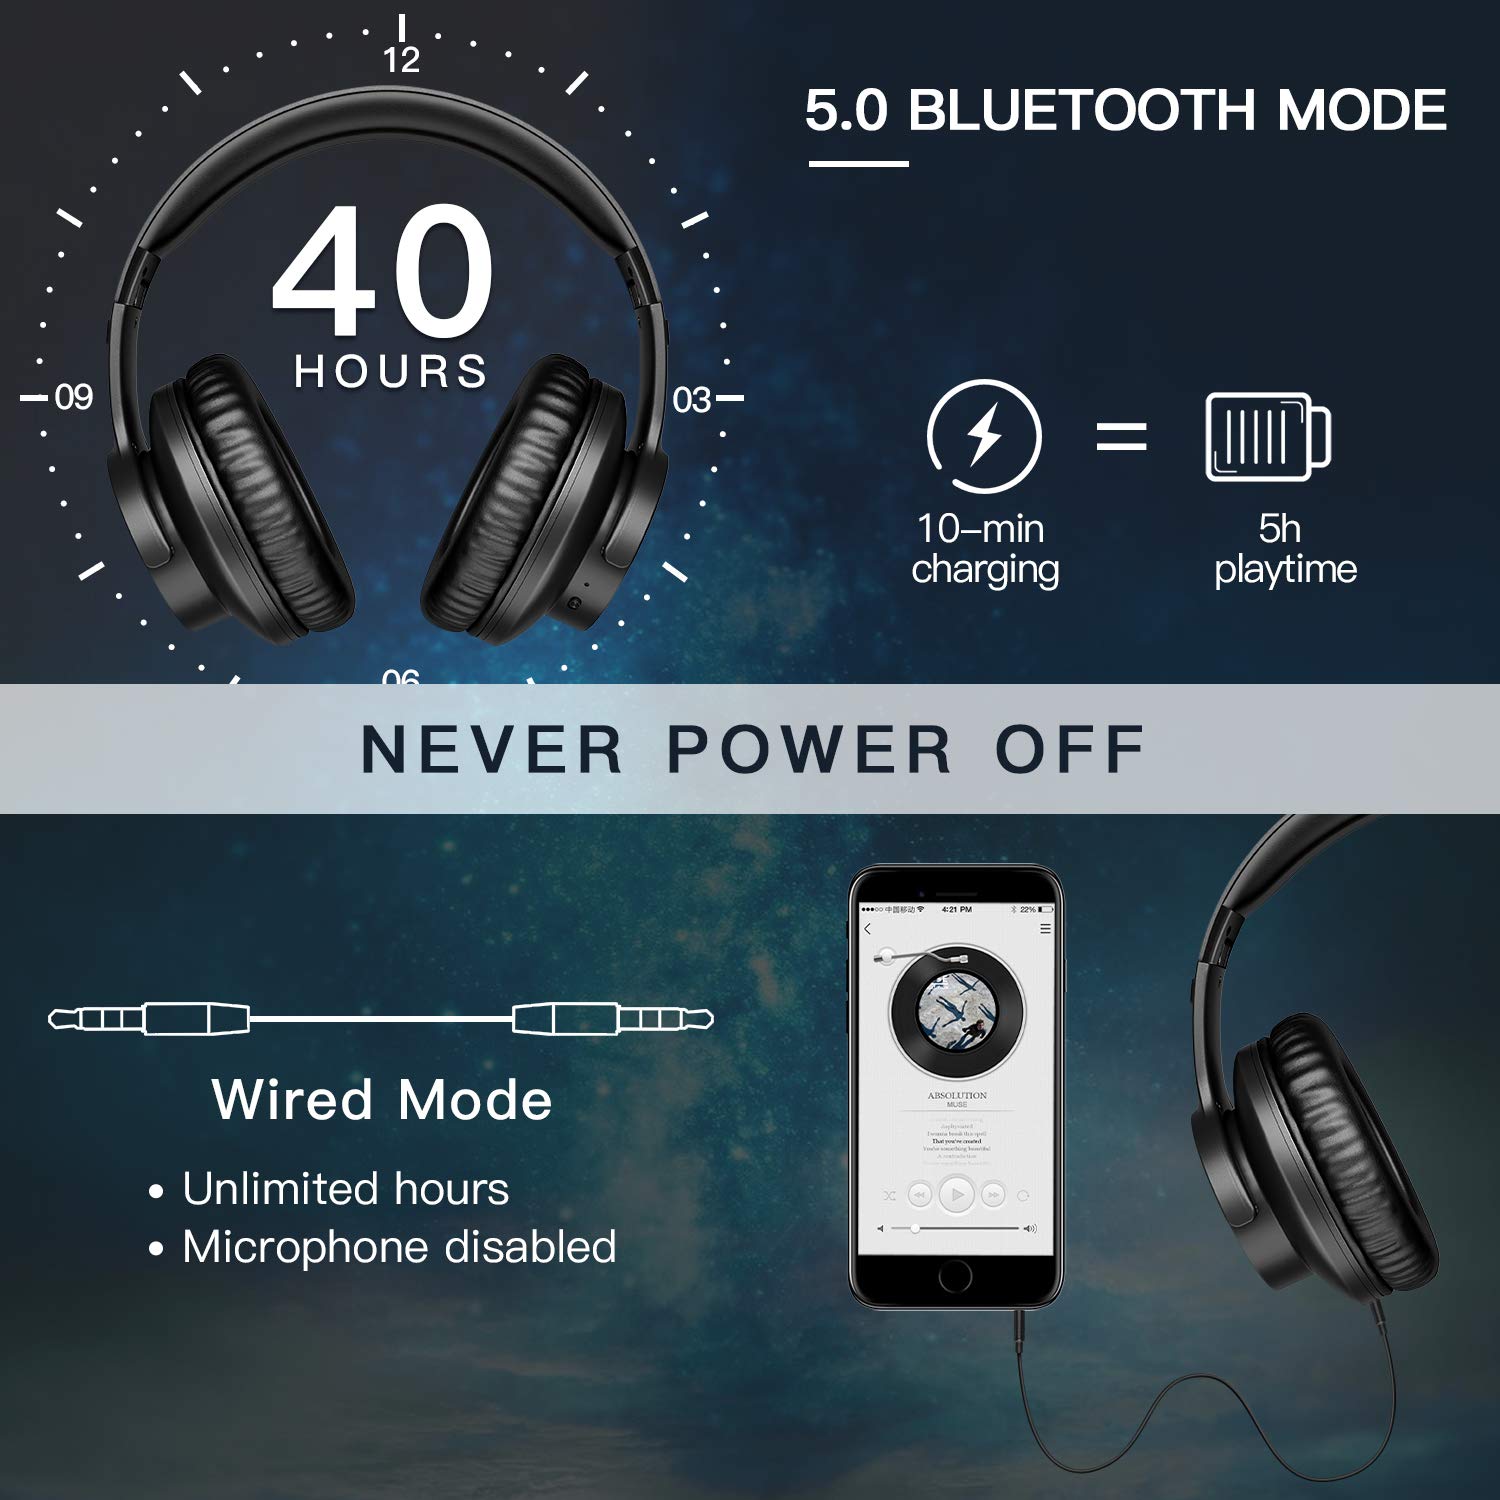 Picun B8 Wireless Headset bluetooth Headphone 50mm Large Driver Touch Control Portable Foldable Sport Gaming Headphones with Mic